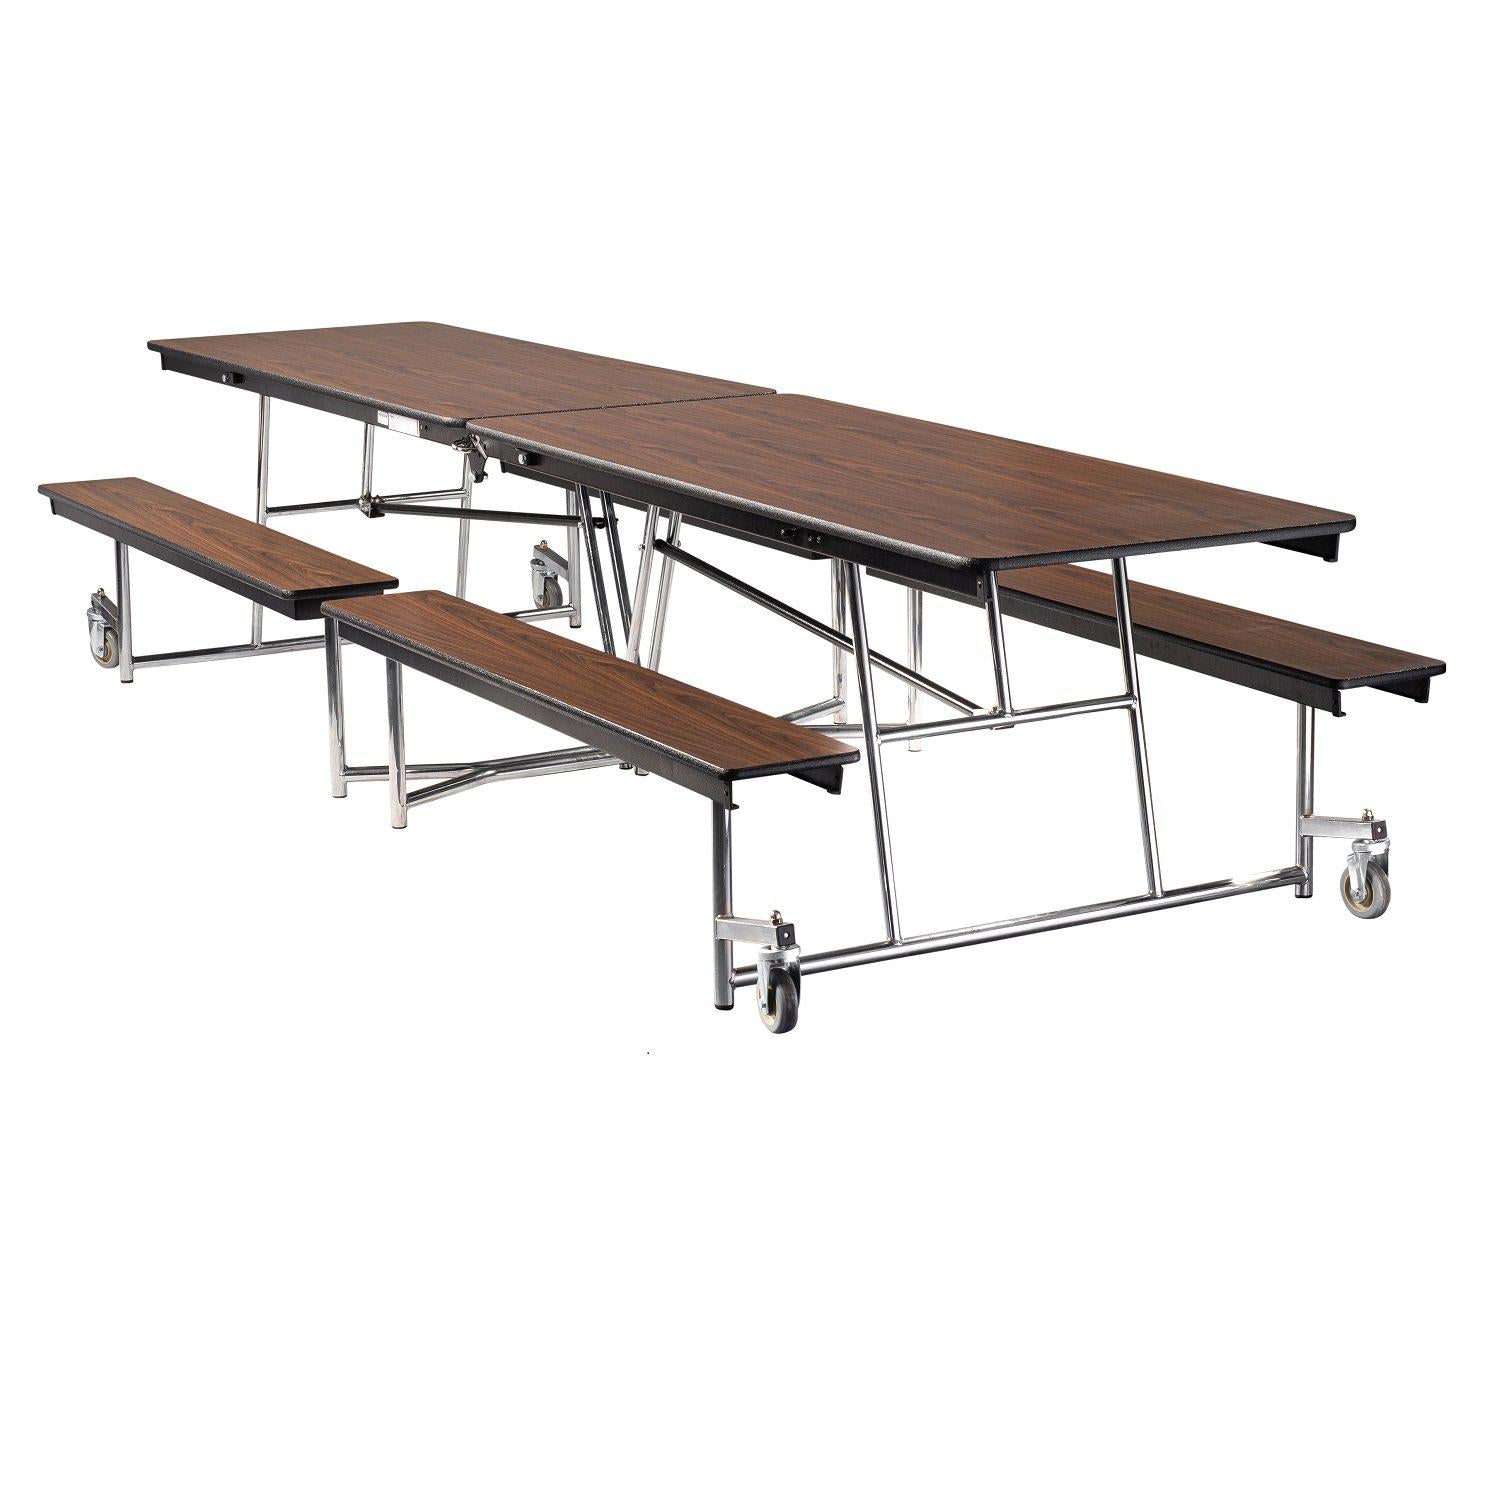 Mobile Cafeteria Table with Benches, 12'L, Particleboard Core, Vinyl T-Mold Edge, Chrome Frame